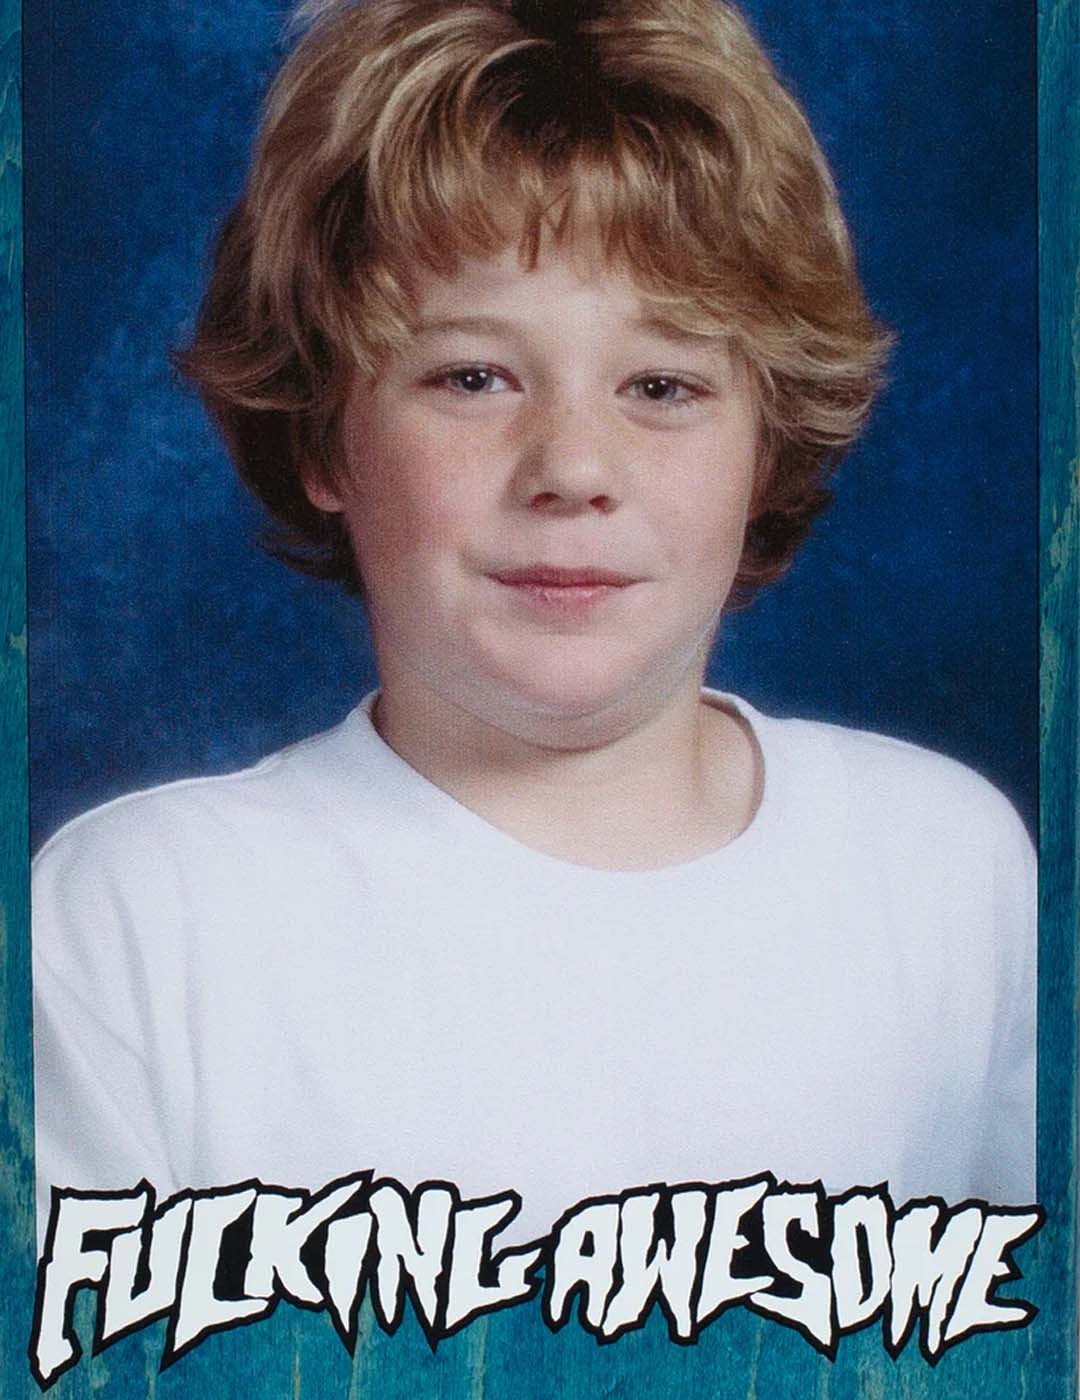 TABLA FUCKING AWESOME  JAKE ANDERSON CLASS PHOTO DECK  BLUE